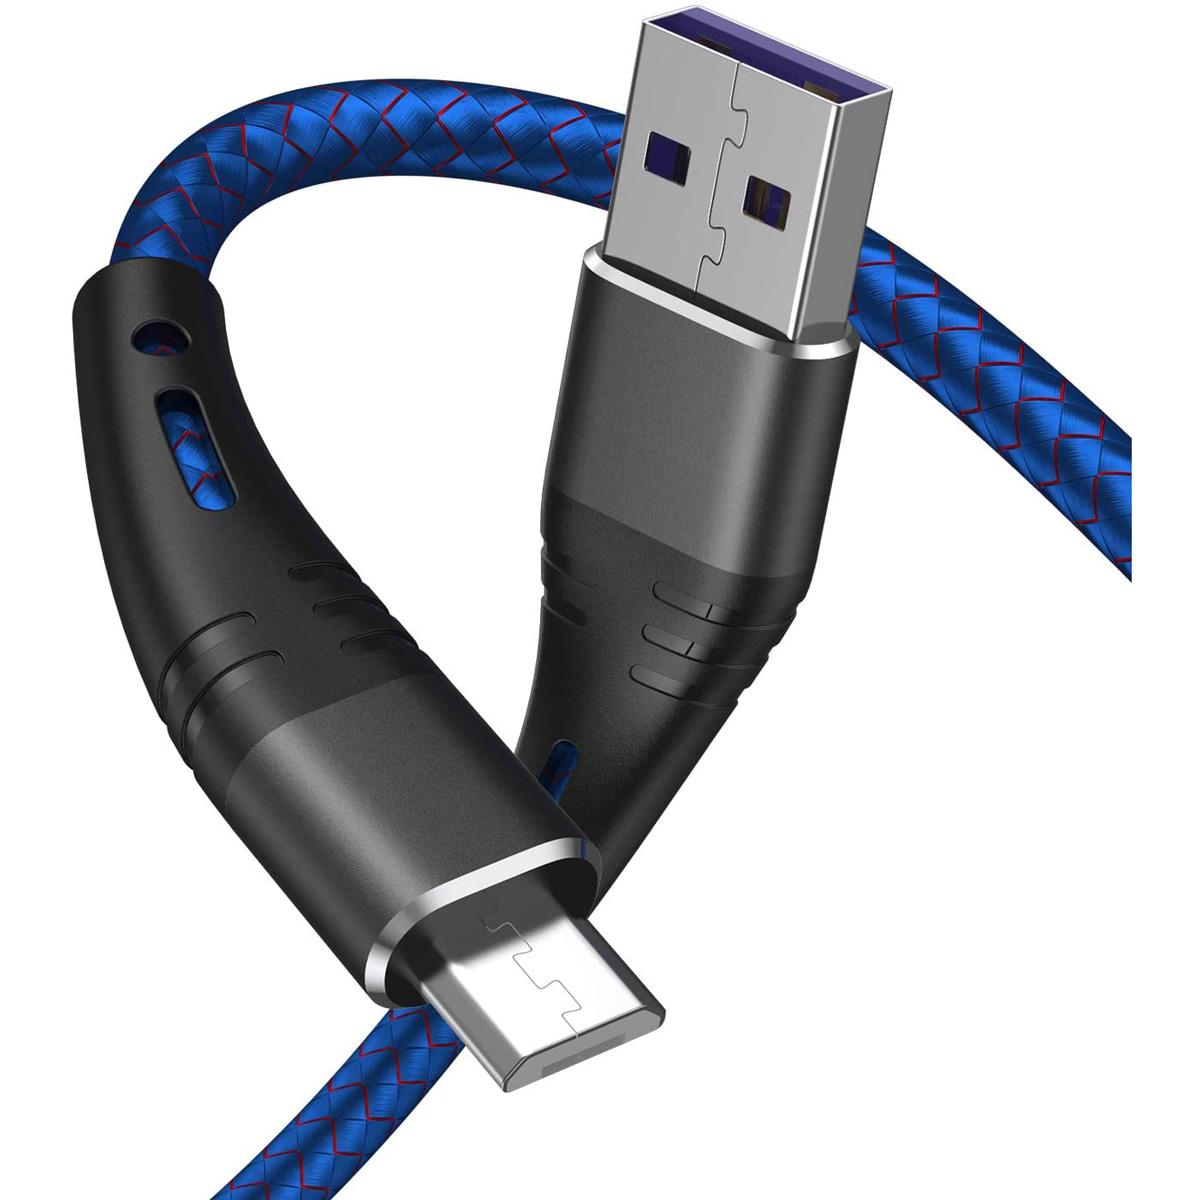 2x 10ft Micro USB Nylon Braided Cables for $2.50